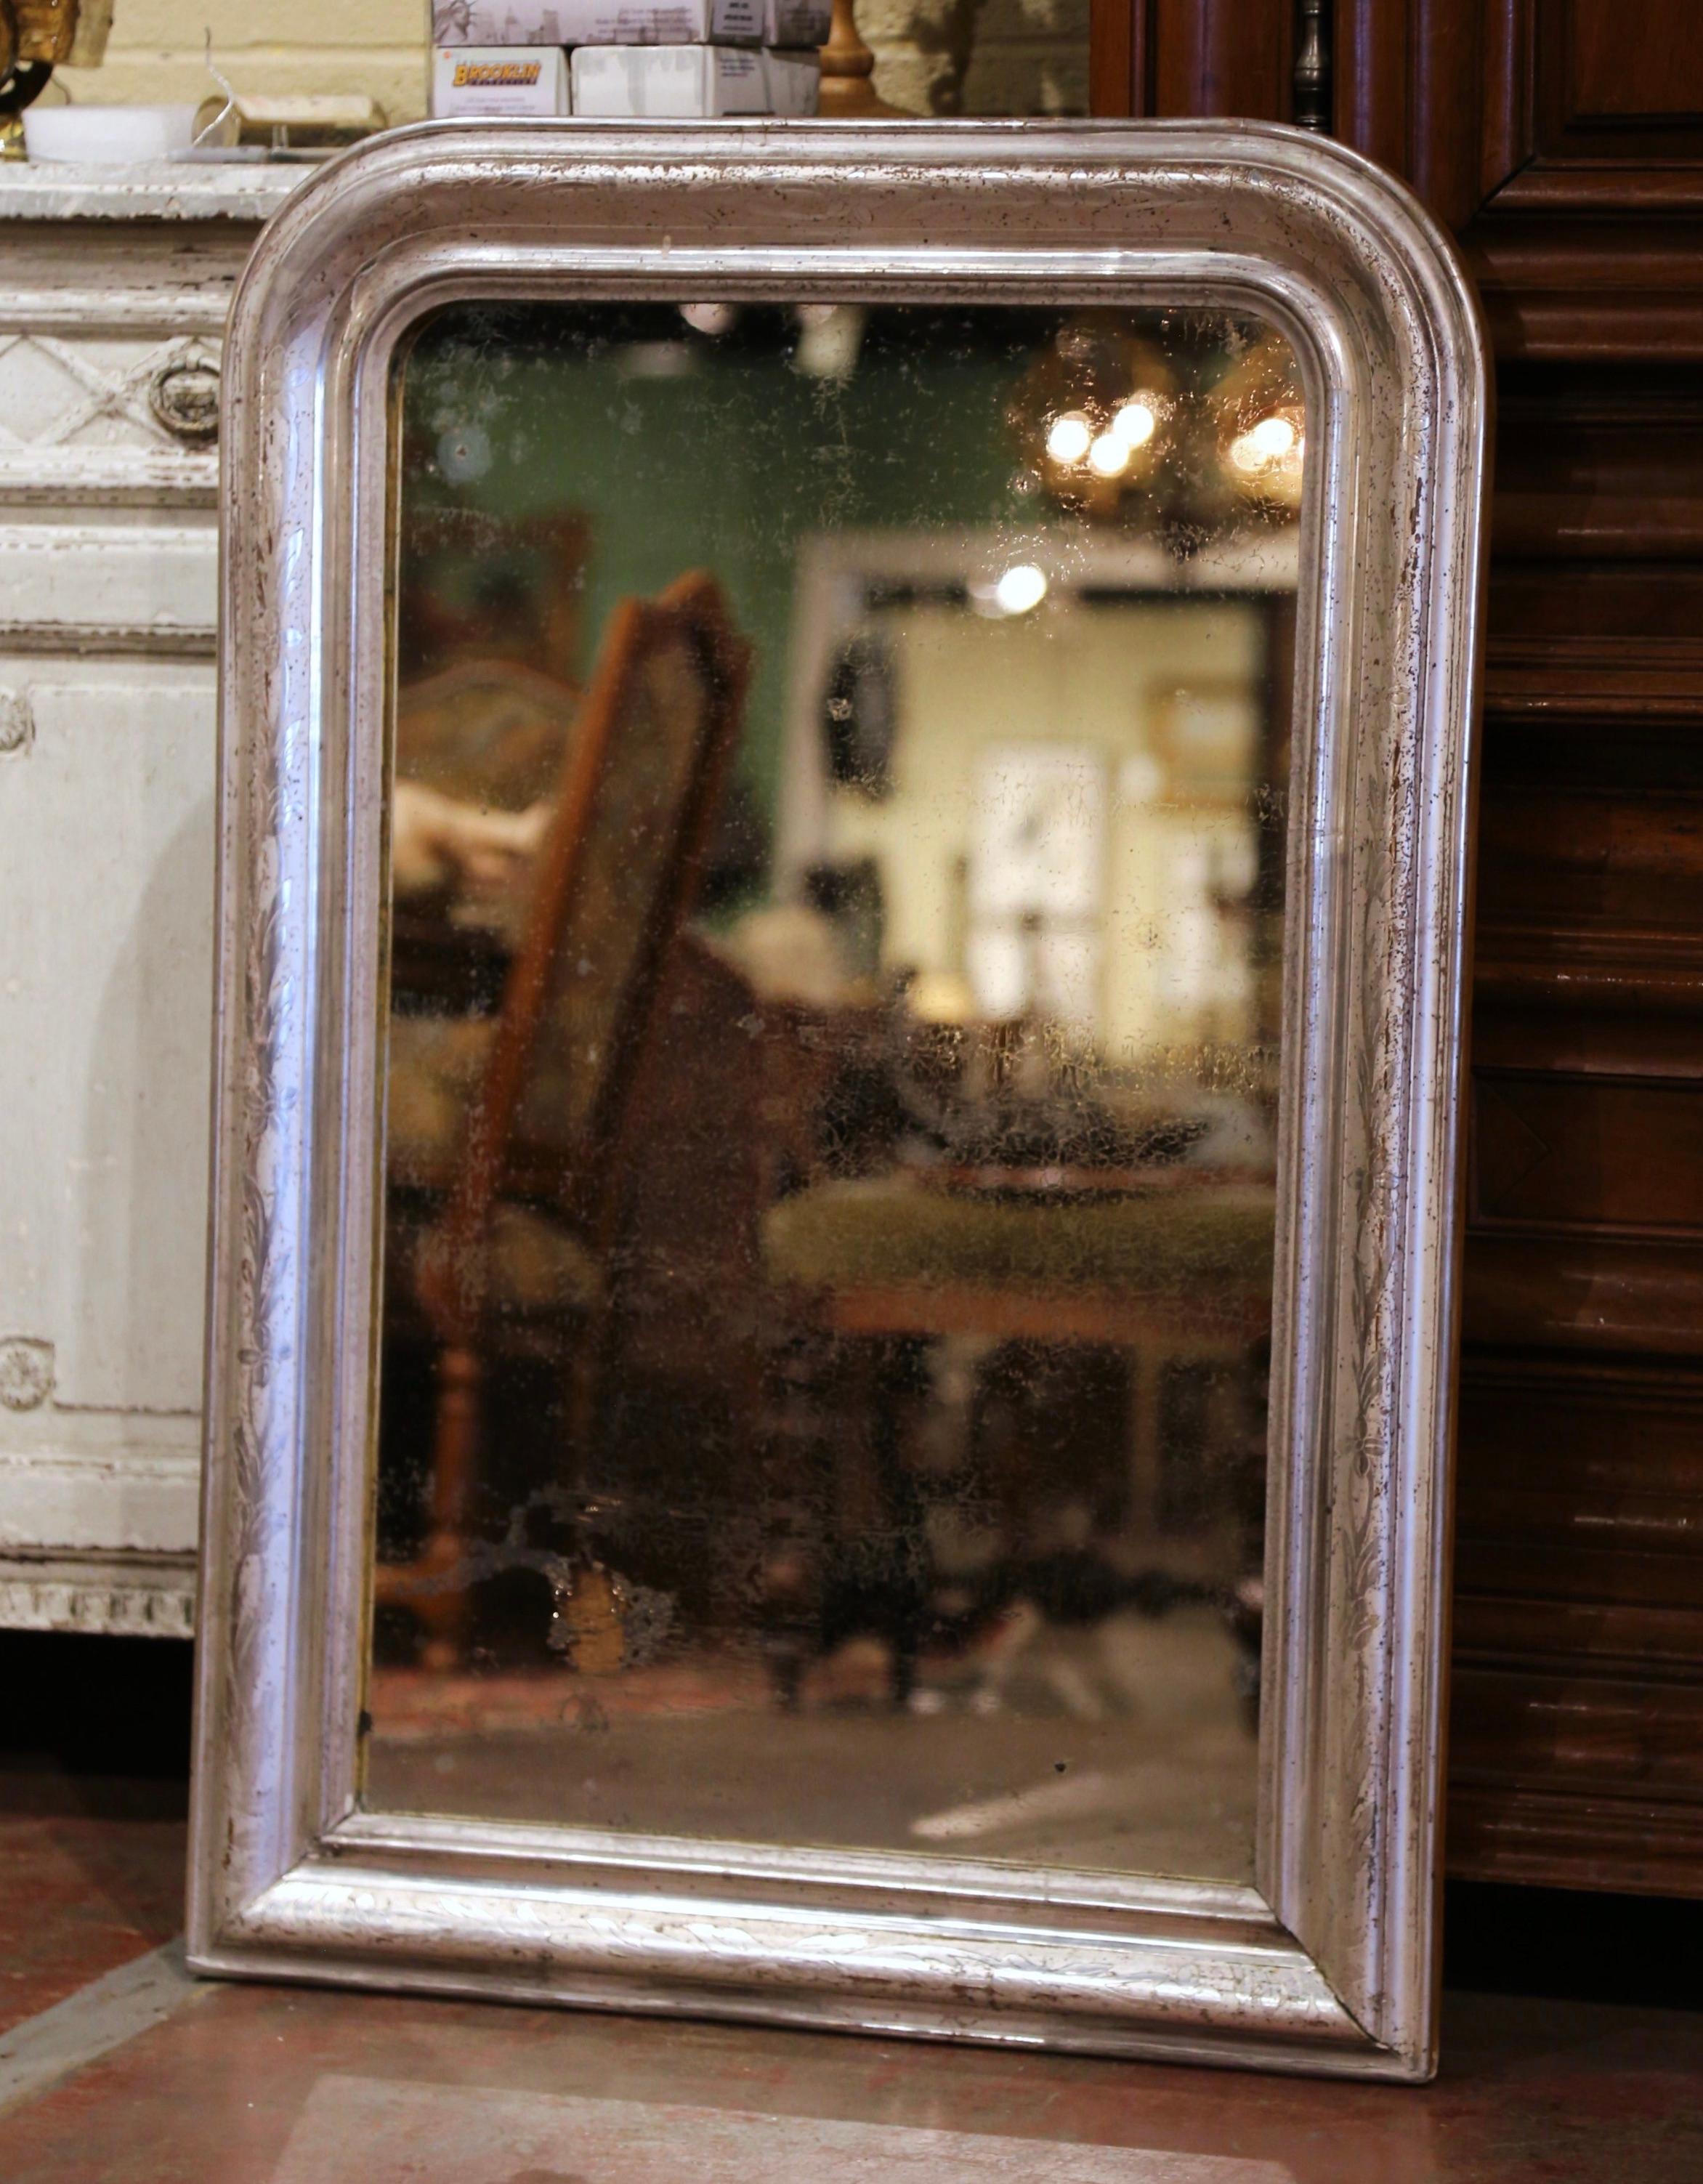 Crafted in the Burgundy region of France, circa 1870, the rectangular wall mirror has traditional, timeless lines with rounded corners. The frame is decorated with a luxurious silver leaf finish, further embellished with discrete engraved decor